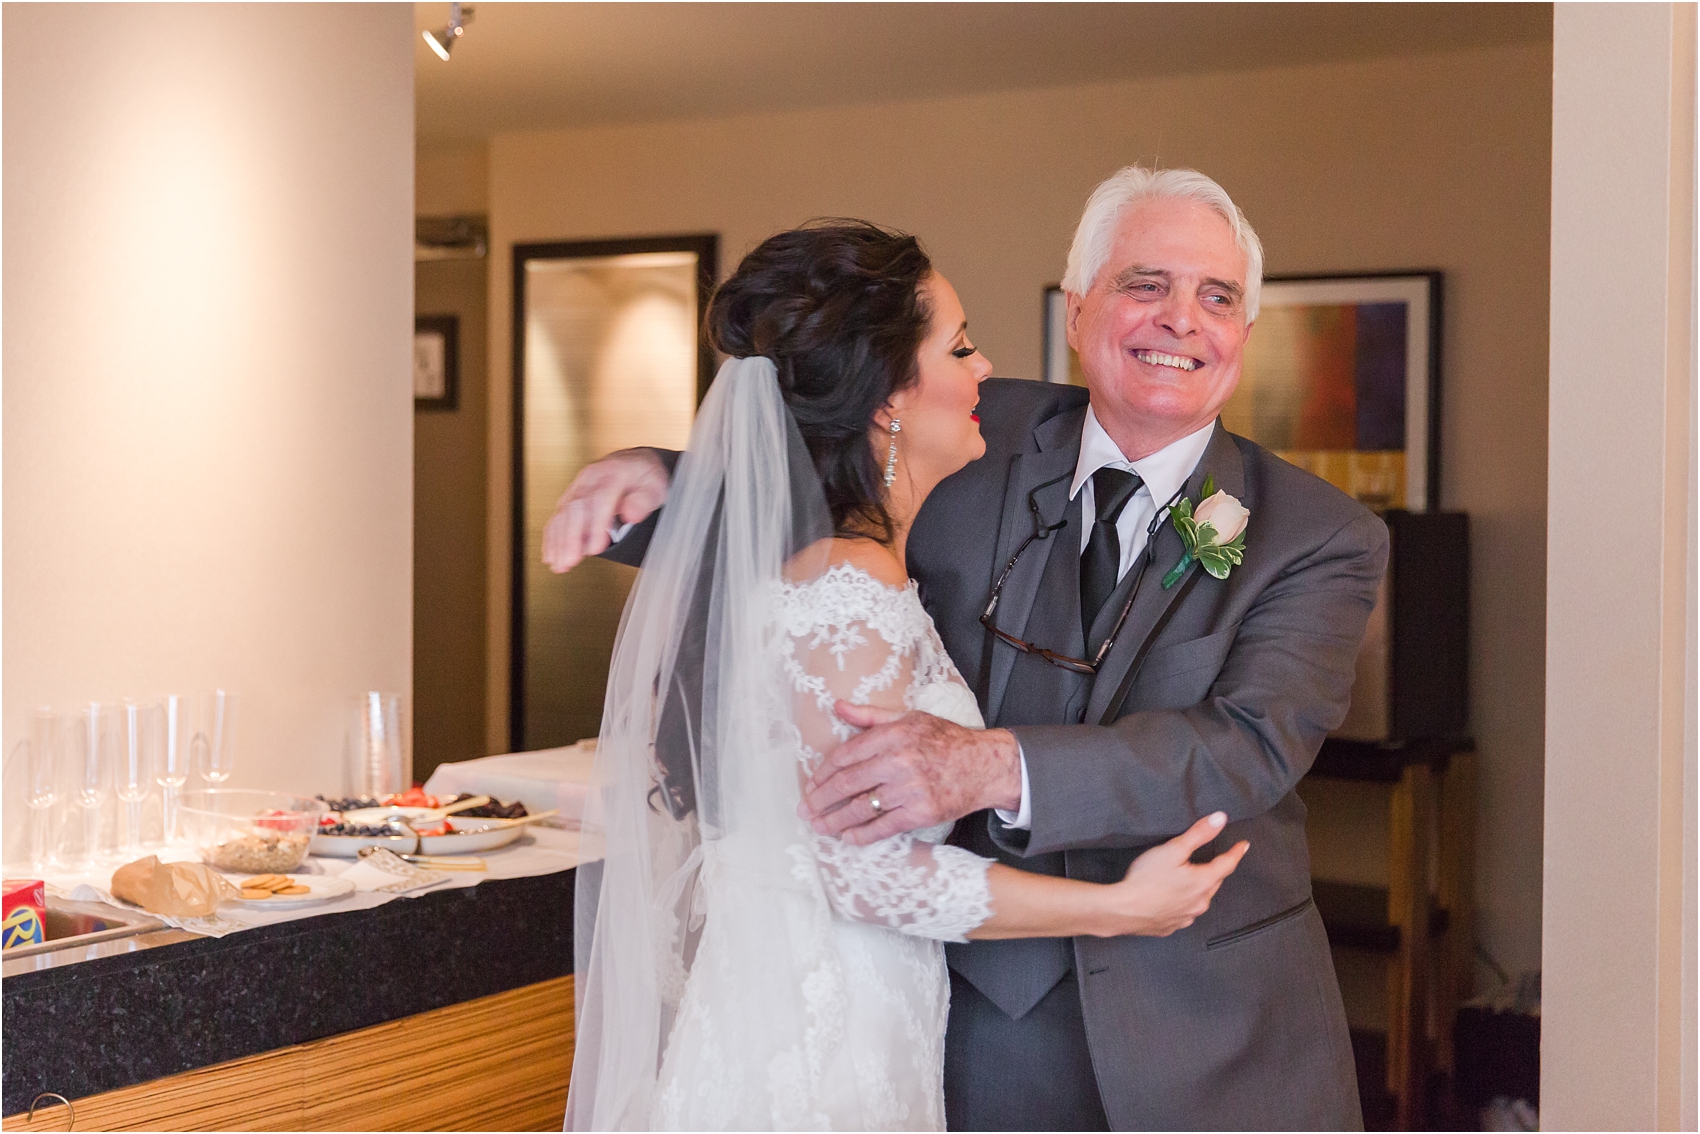 father-and-bride-share-emotional-first-look-on-wedding-day-photos-in-detroit-michigan-by-courtney-carolyn-photography_0038.jpg